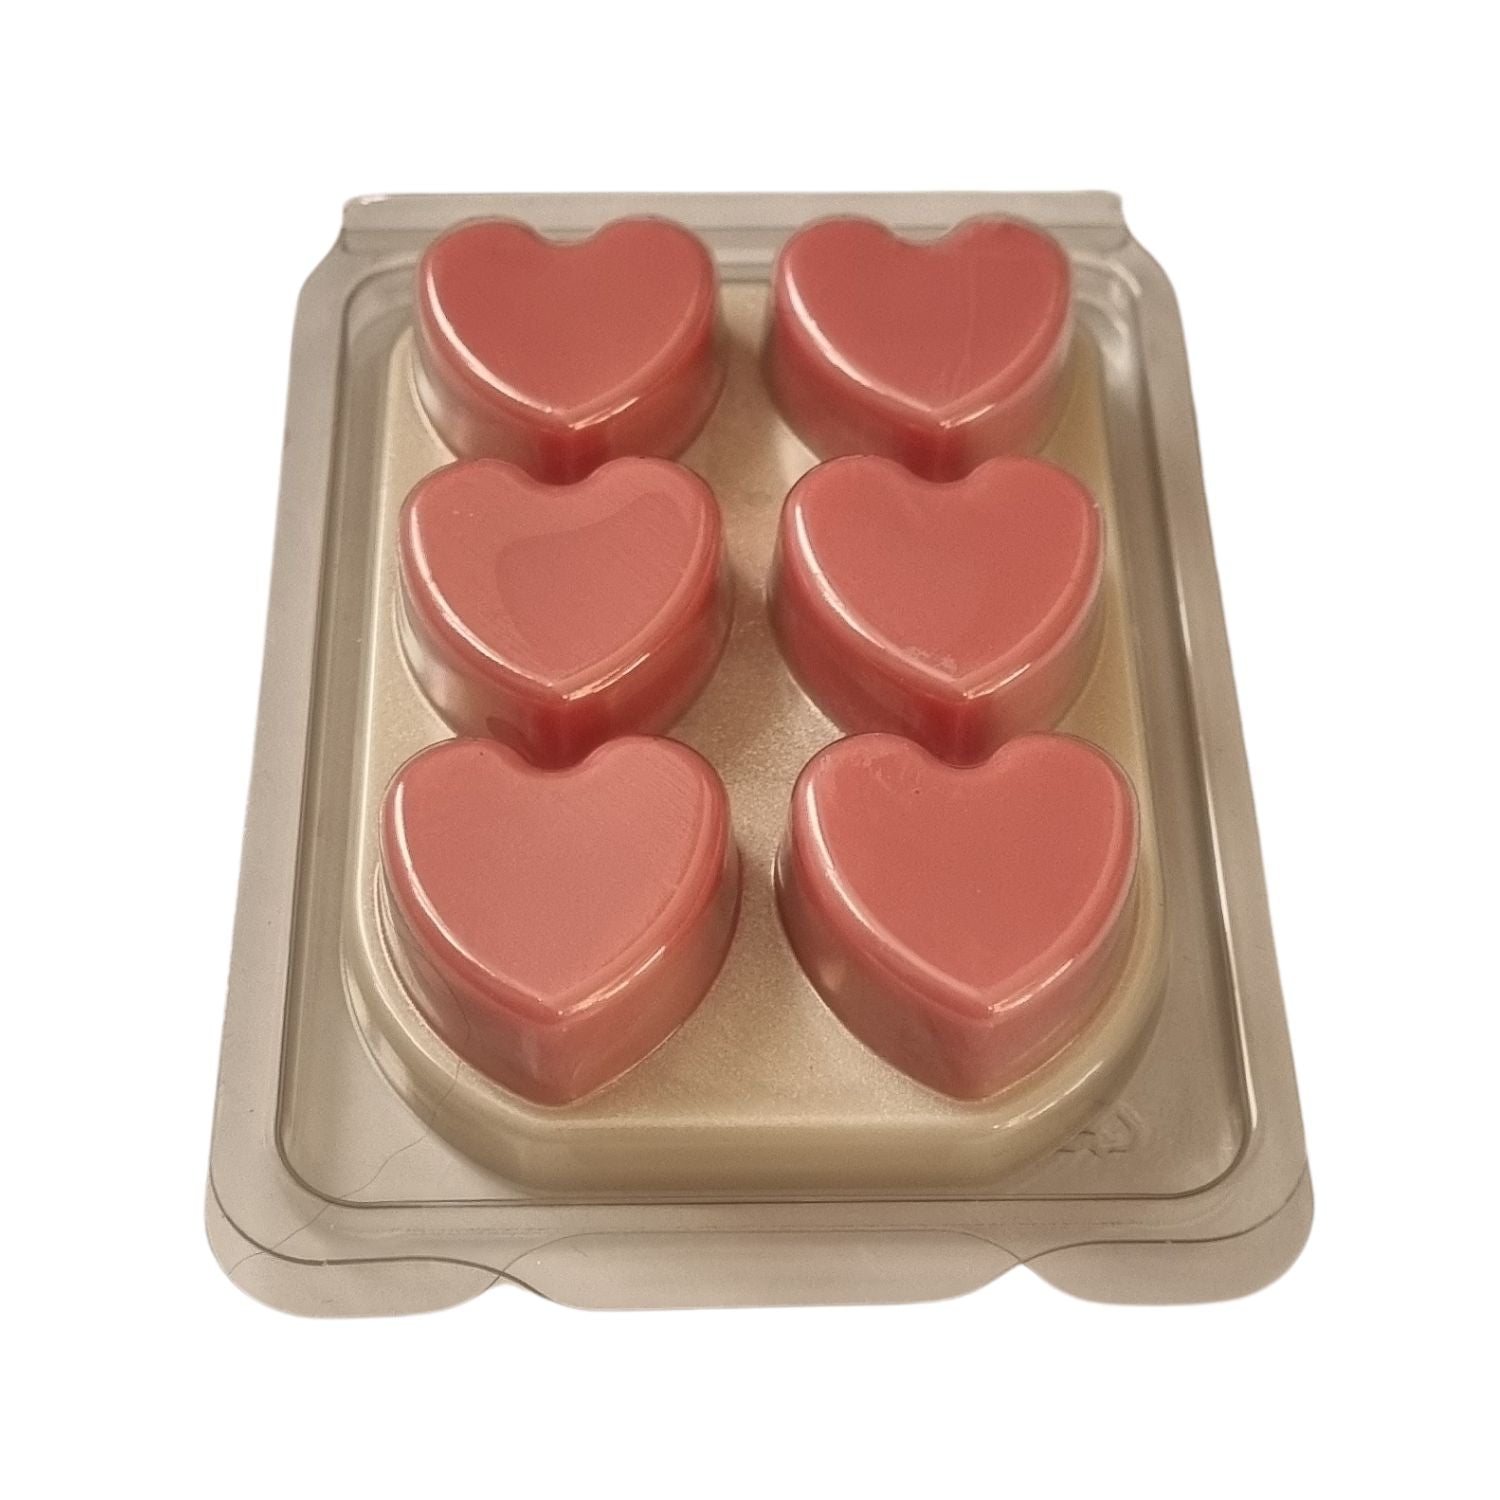 Scented Soy Wax Melts in hearts Clamshell with 6 soft pink Hearts on white wax melt background angled view